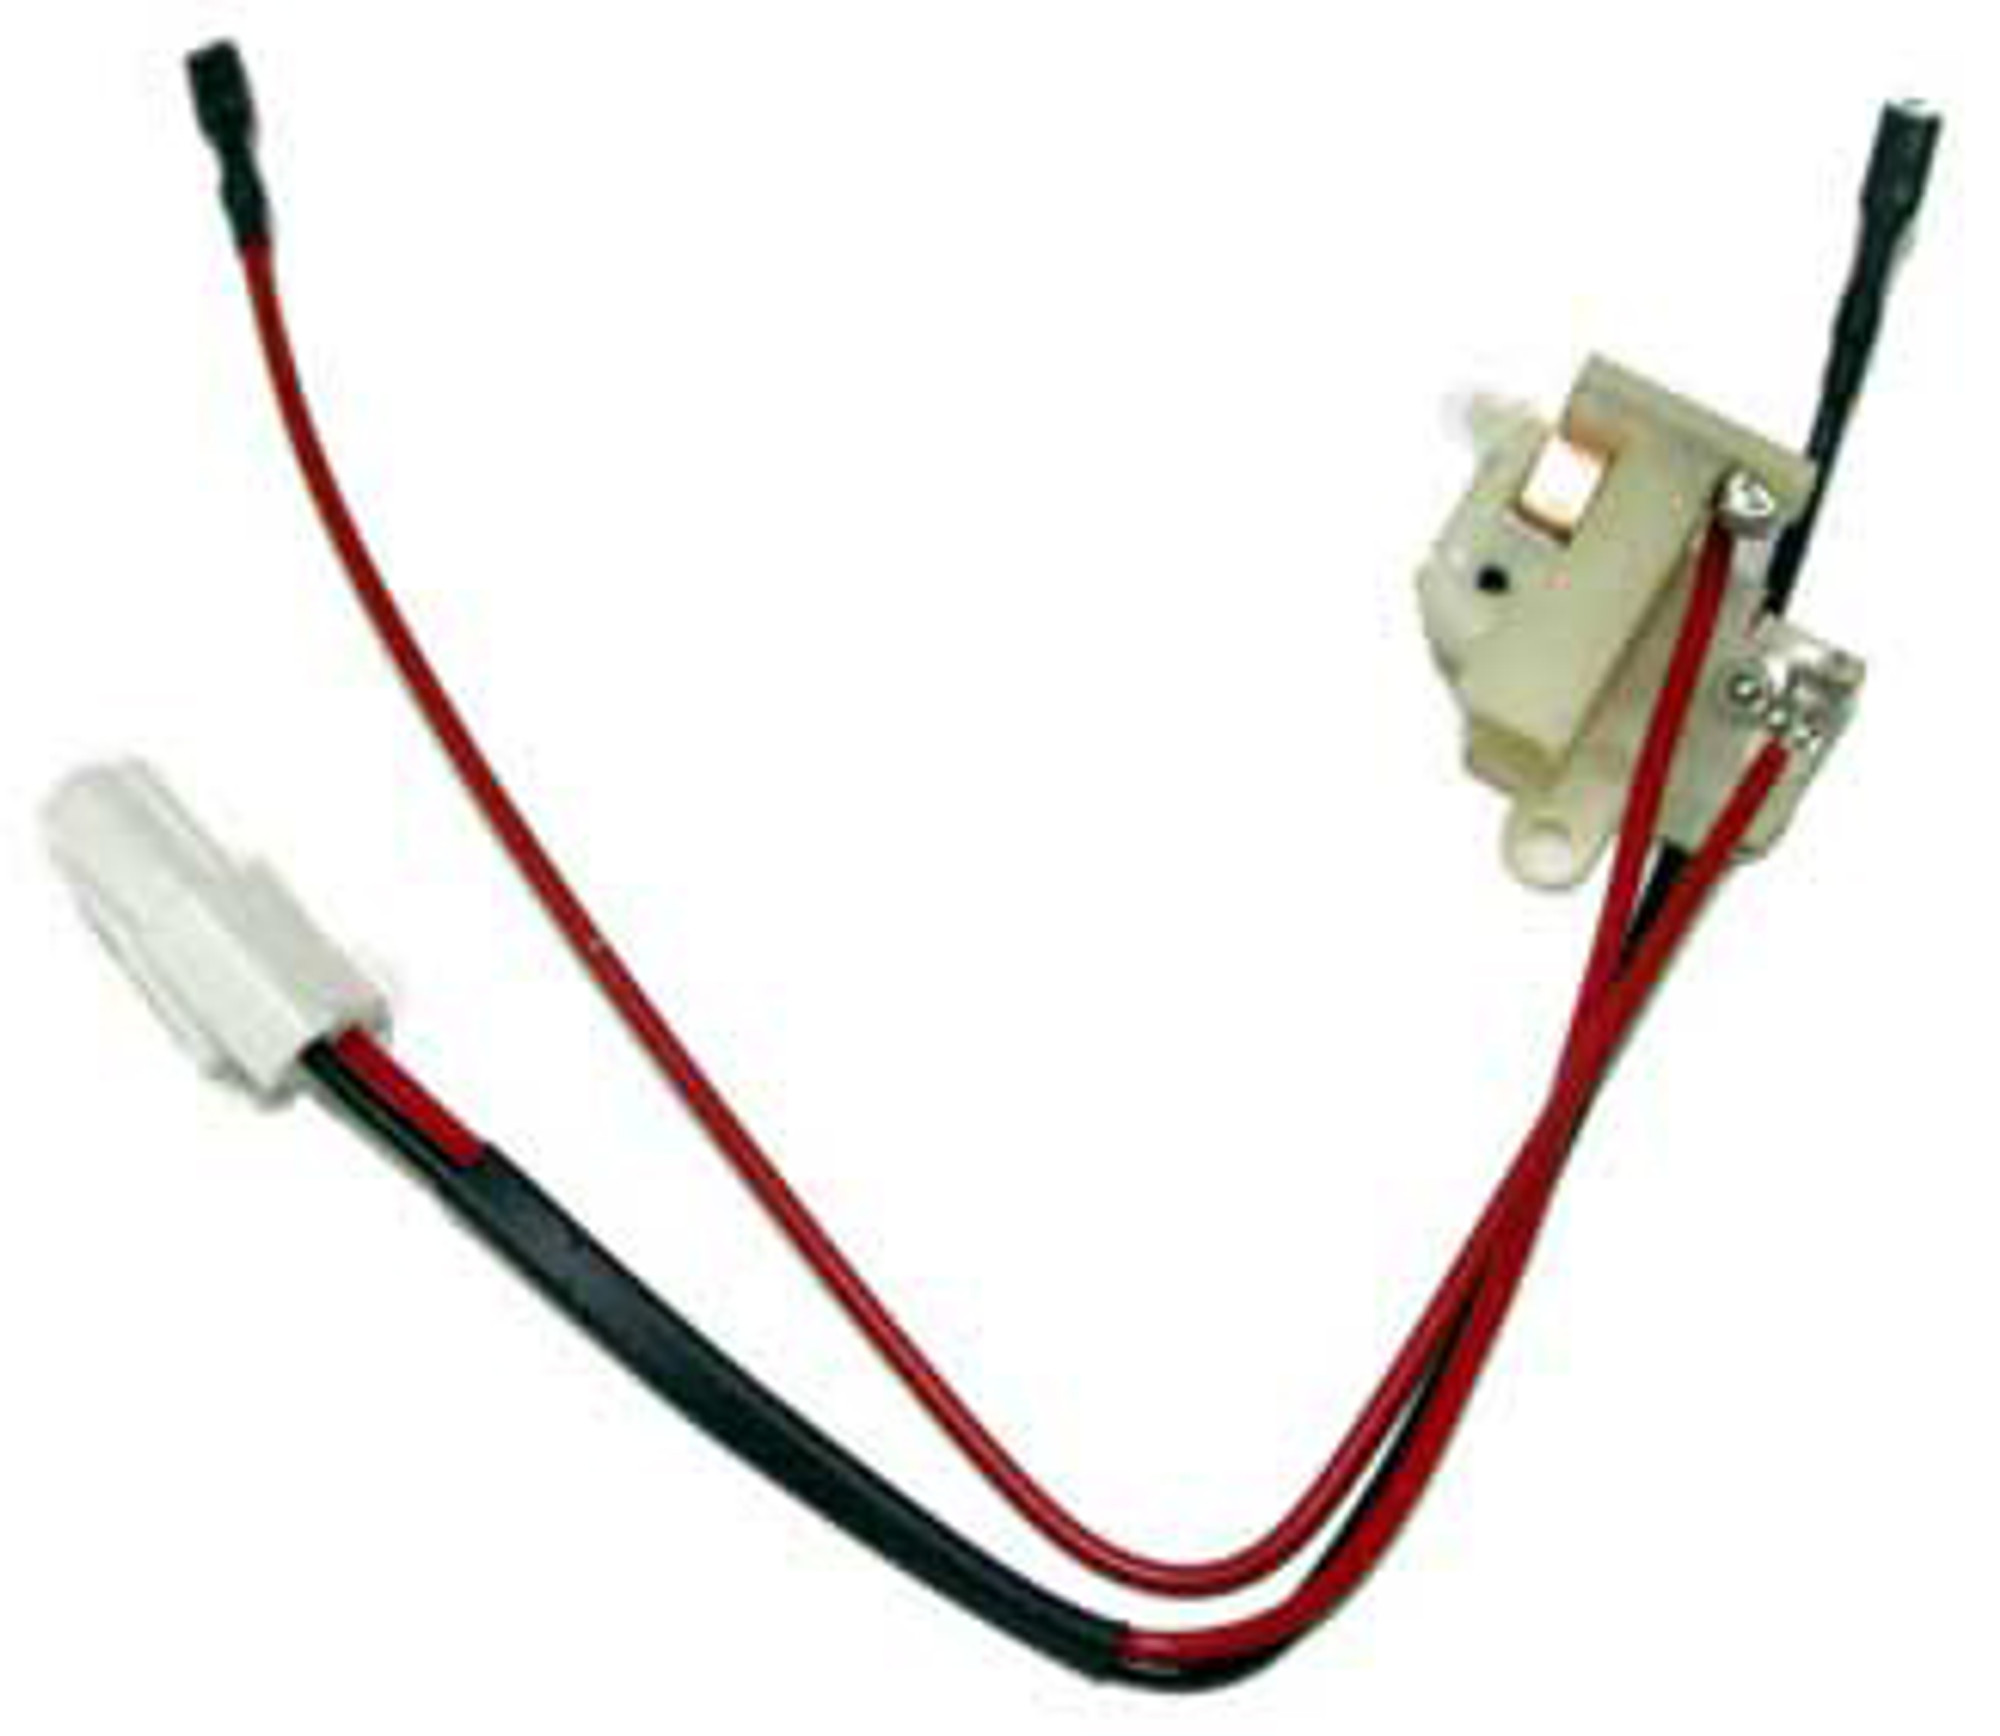 ICS Switch Assembly, Selected Wire Material, Low Resistance for M4 Series Airsoft AEG